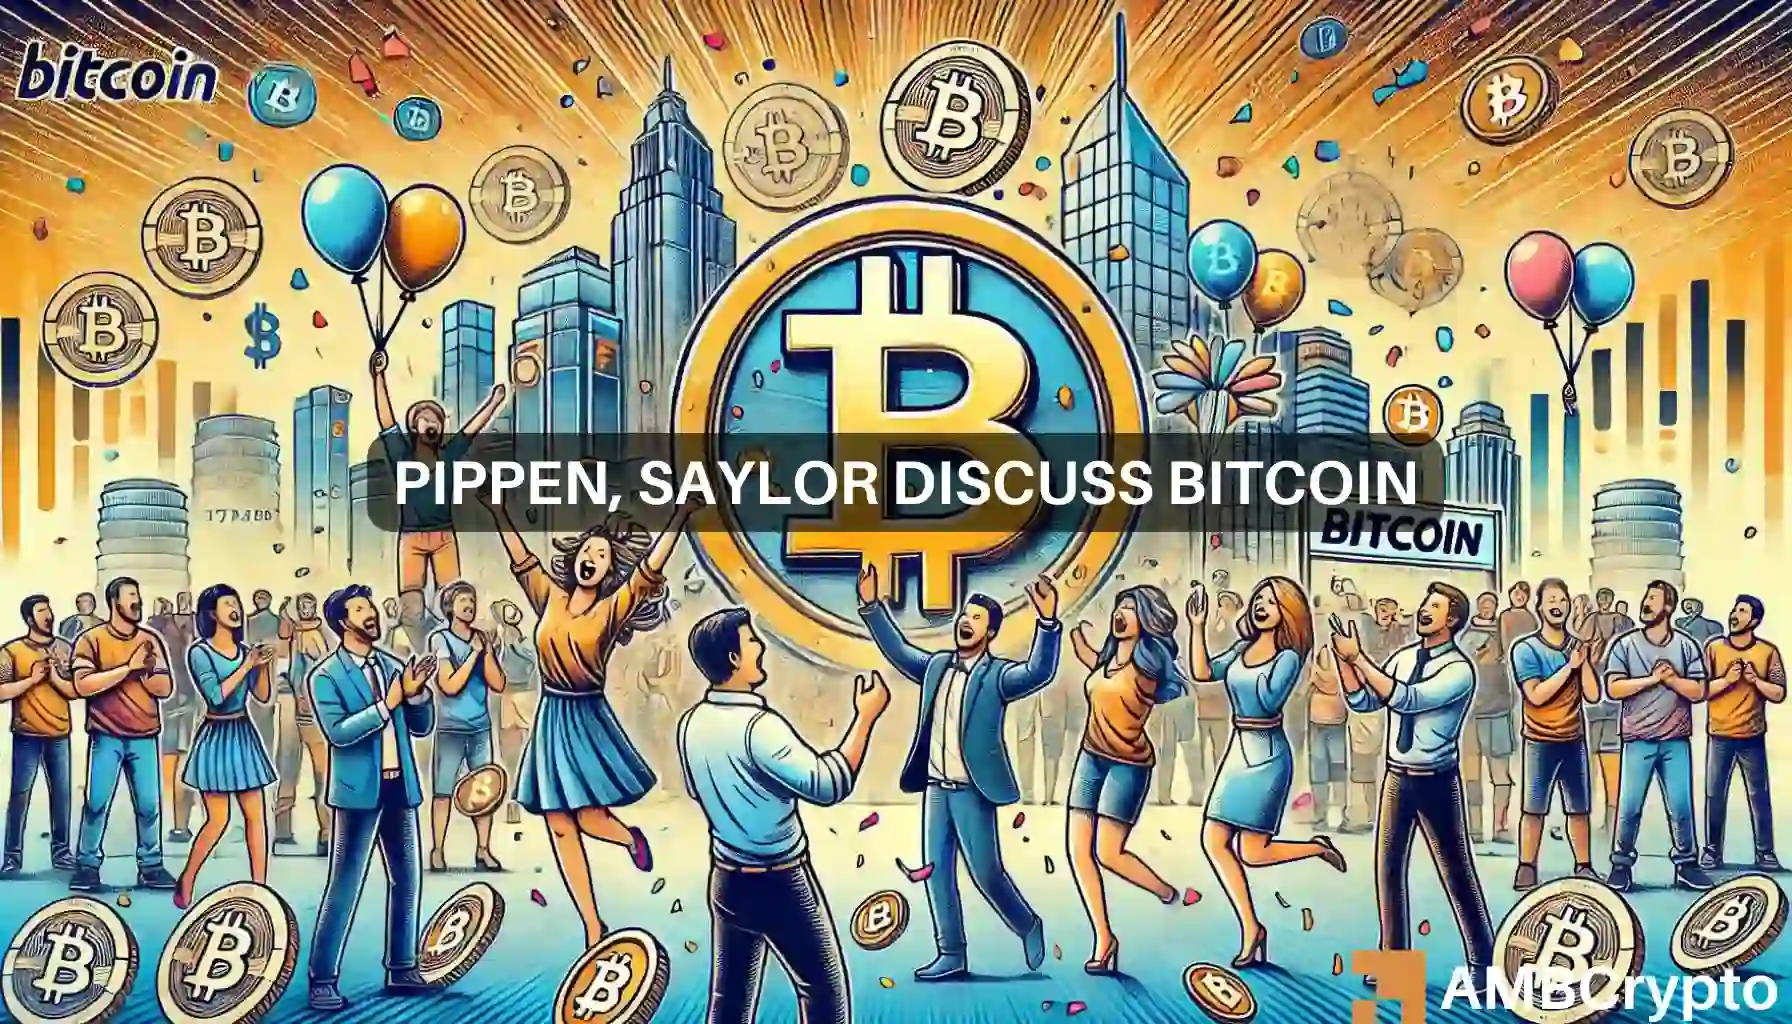 Michael Saylor says ‘Buy Bitcoin!’ to NBA legend Scottie Pippen: Why? logo